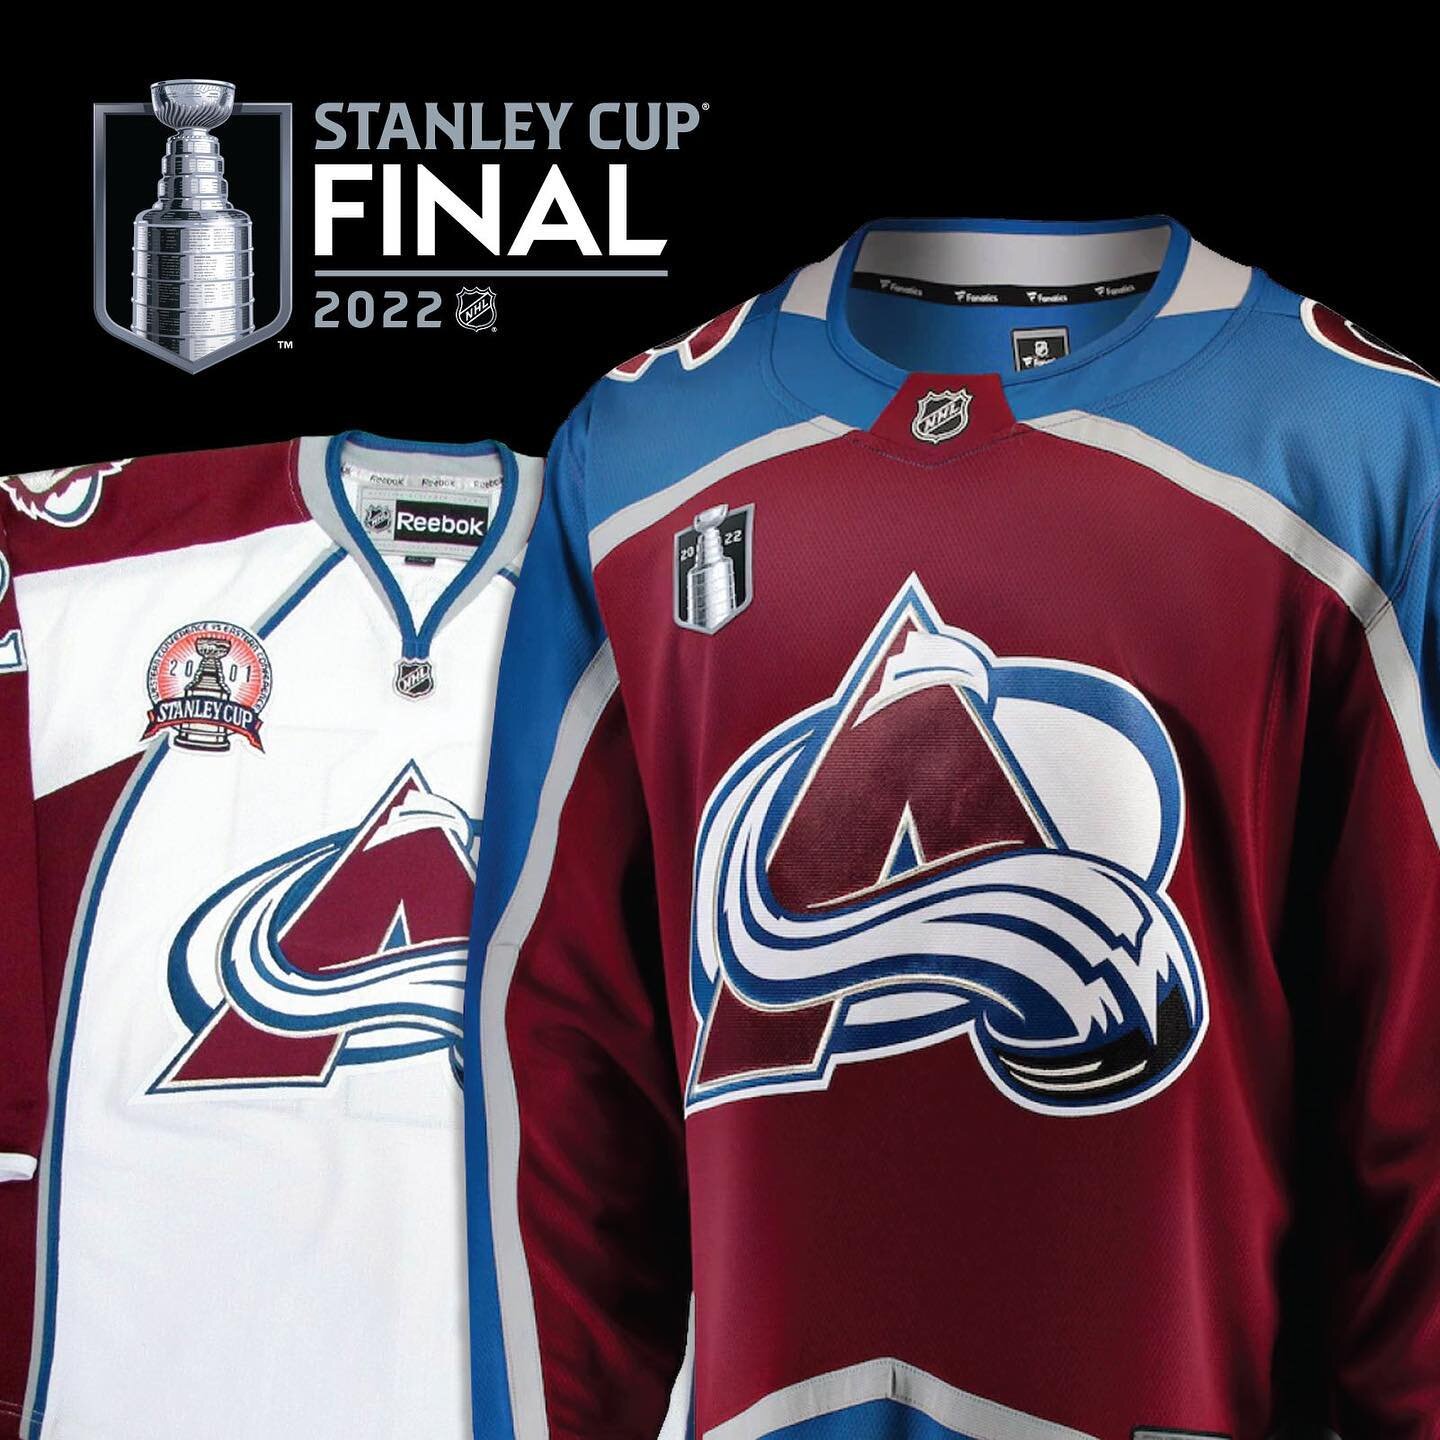 FBZ HAT TRICK!
We were honored to have worked on the 1995 rebrand of the Avalanche, the 1999 redesign of the Stanley Cup logo - and all these years later - the Stanley Cup rebrand in 2022!
#designforsport #stanleycup #stanleycupfinal #coloradoavalanc